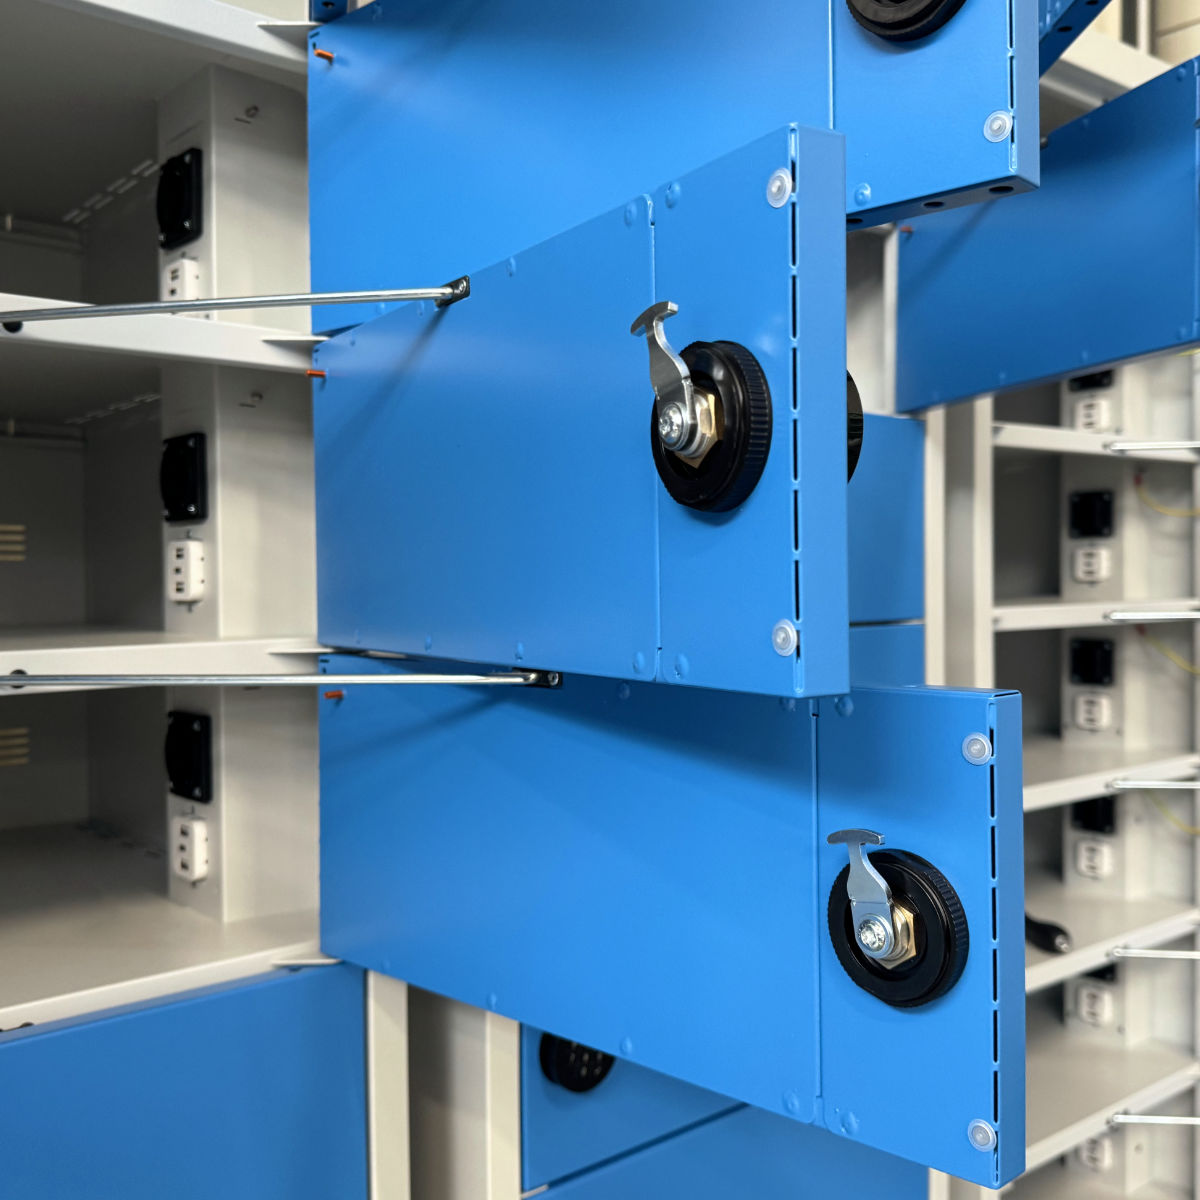 Charging cabinets are secured with an opening angle limiter for added safety